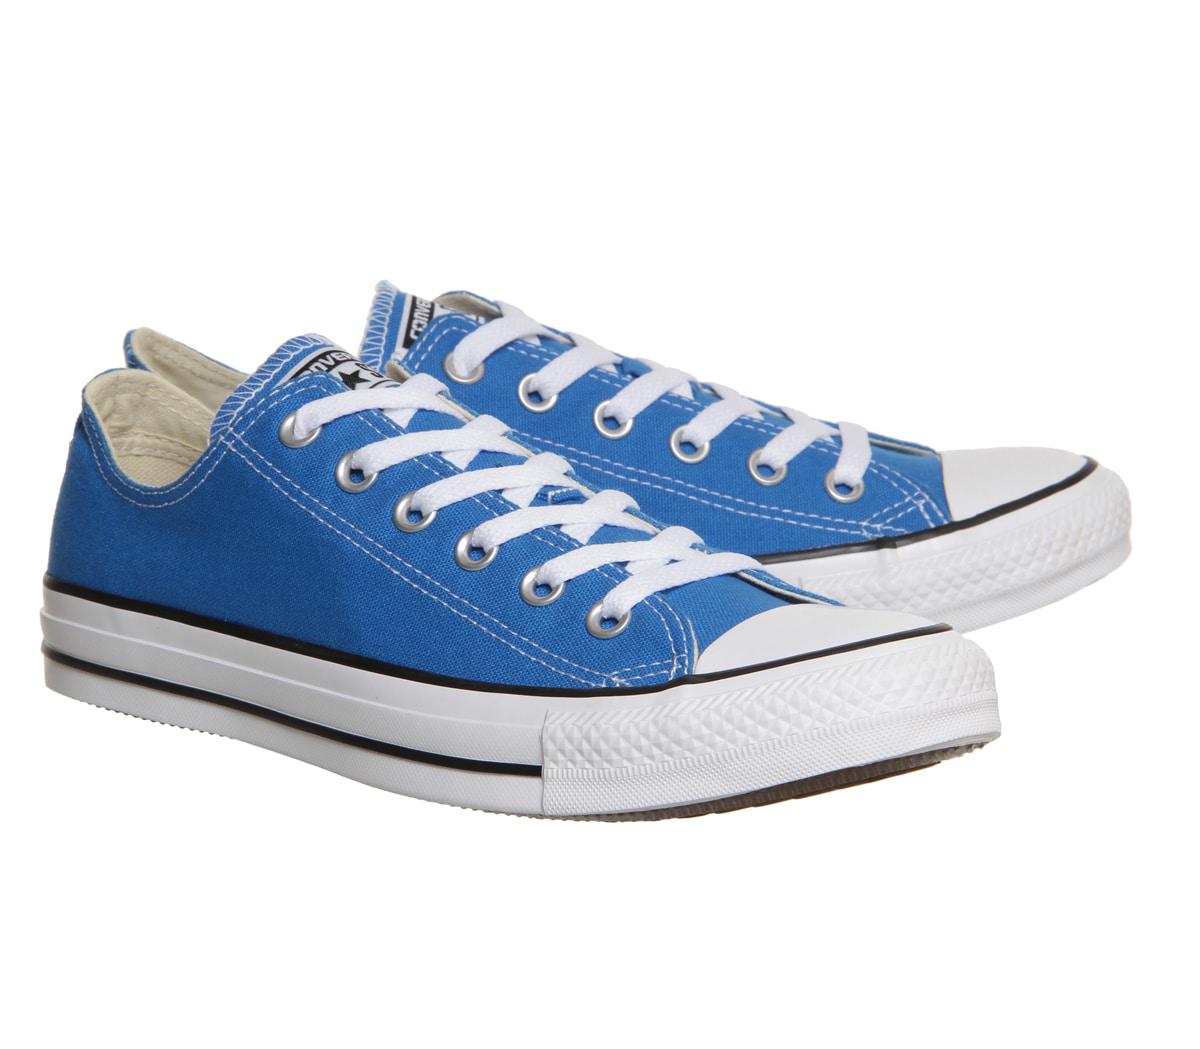 Lyst - Converse All Star Low in Blue